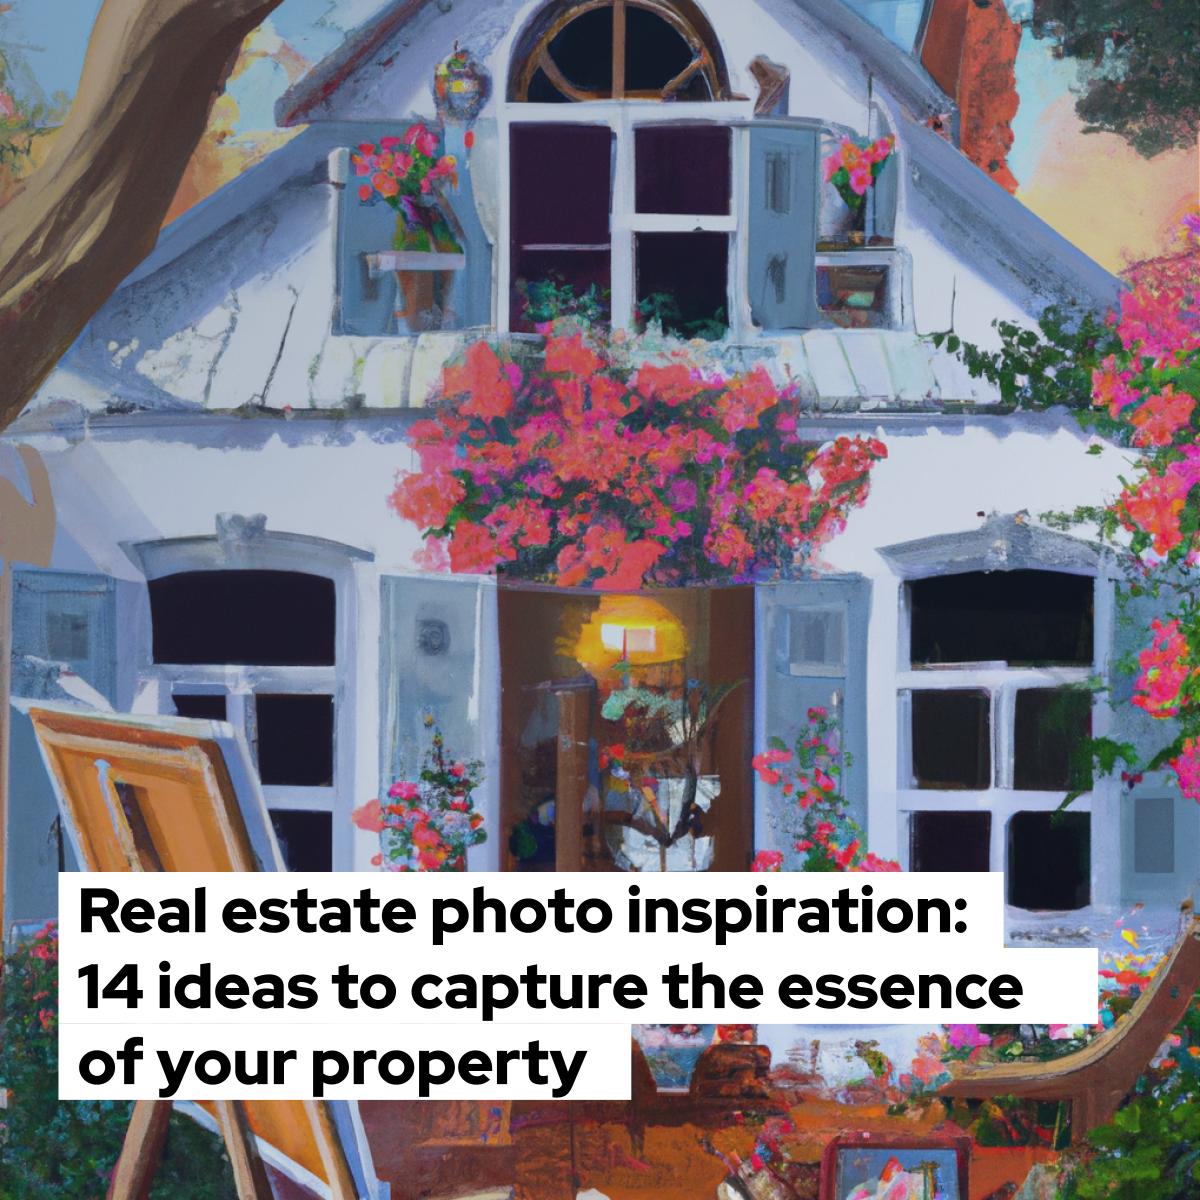 Real estate photo inspiration 14 ideas to capture the essence of your property